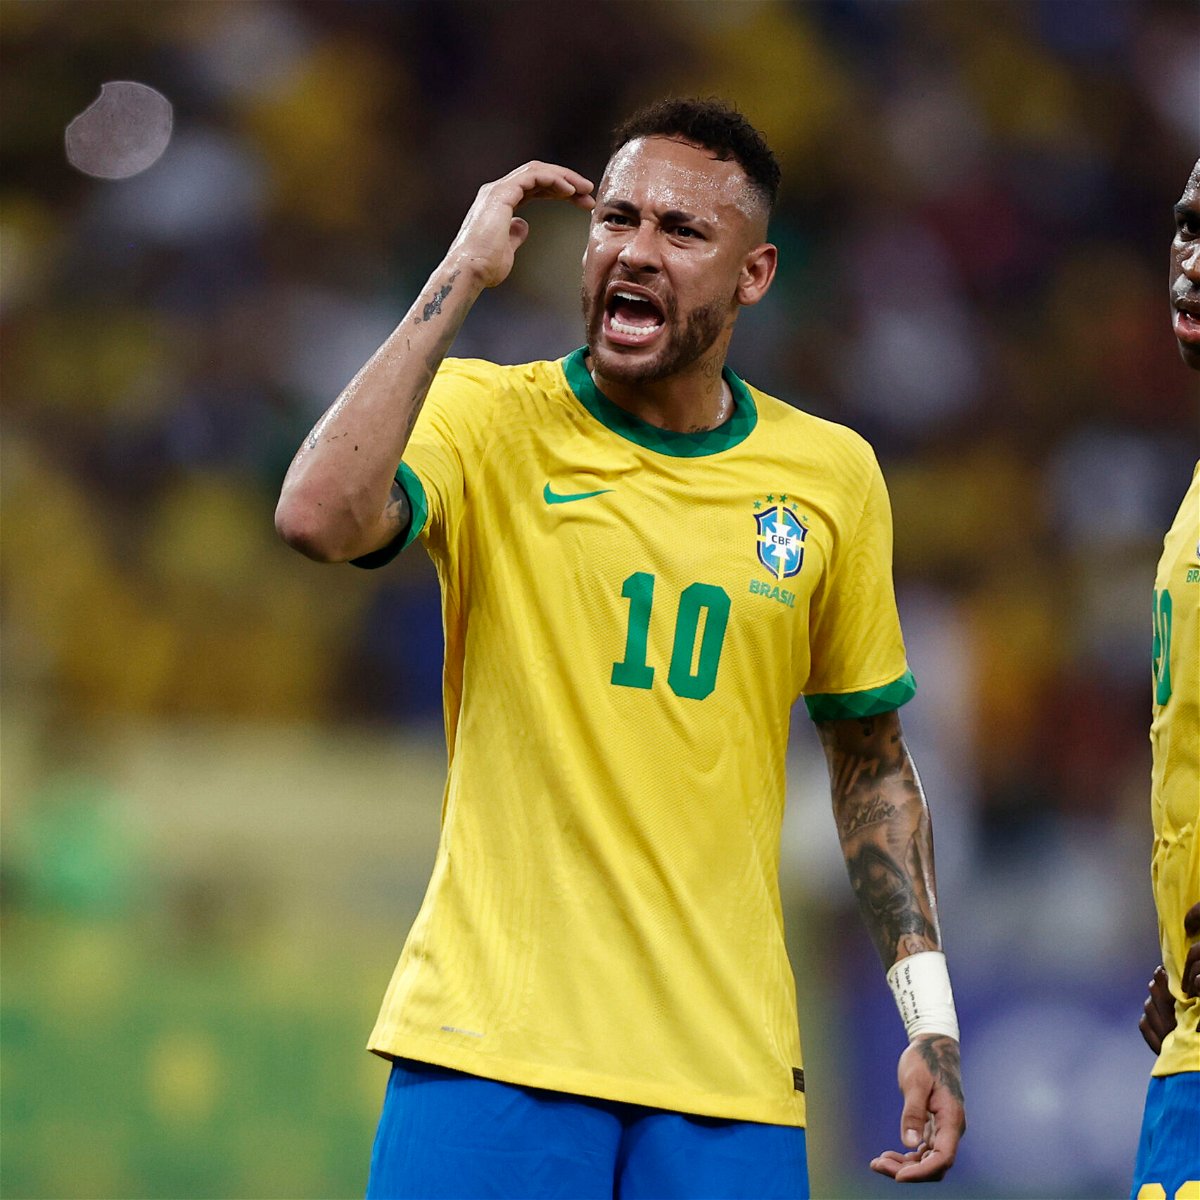 Neymar, Vinicius, Casemiro: What are the wages of Brazil's World Cup squad?